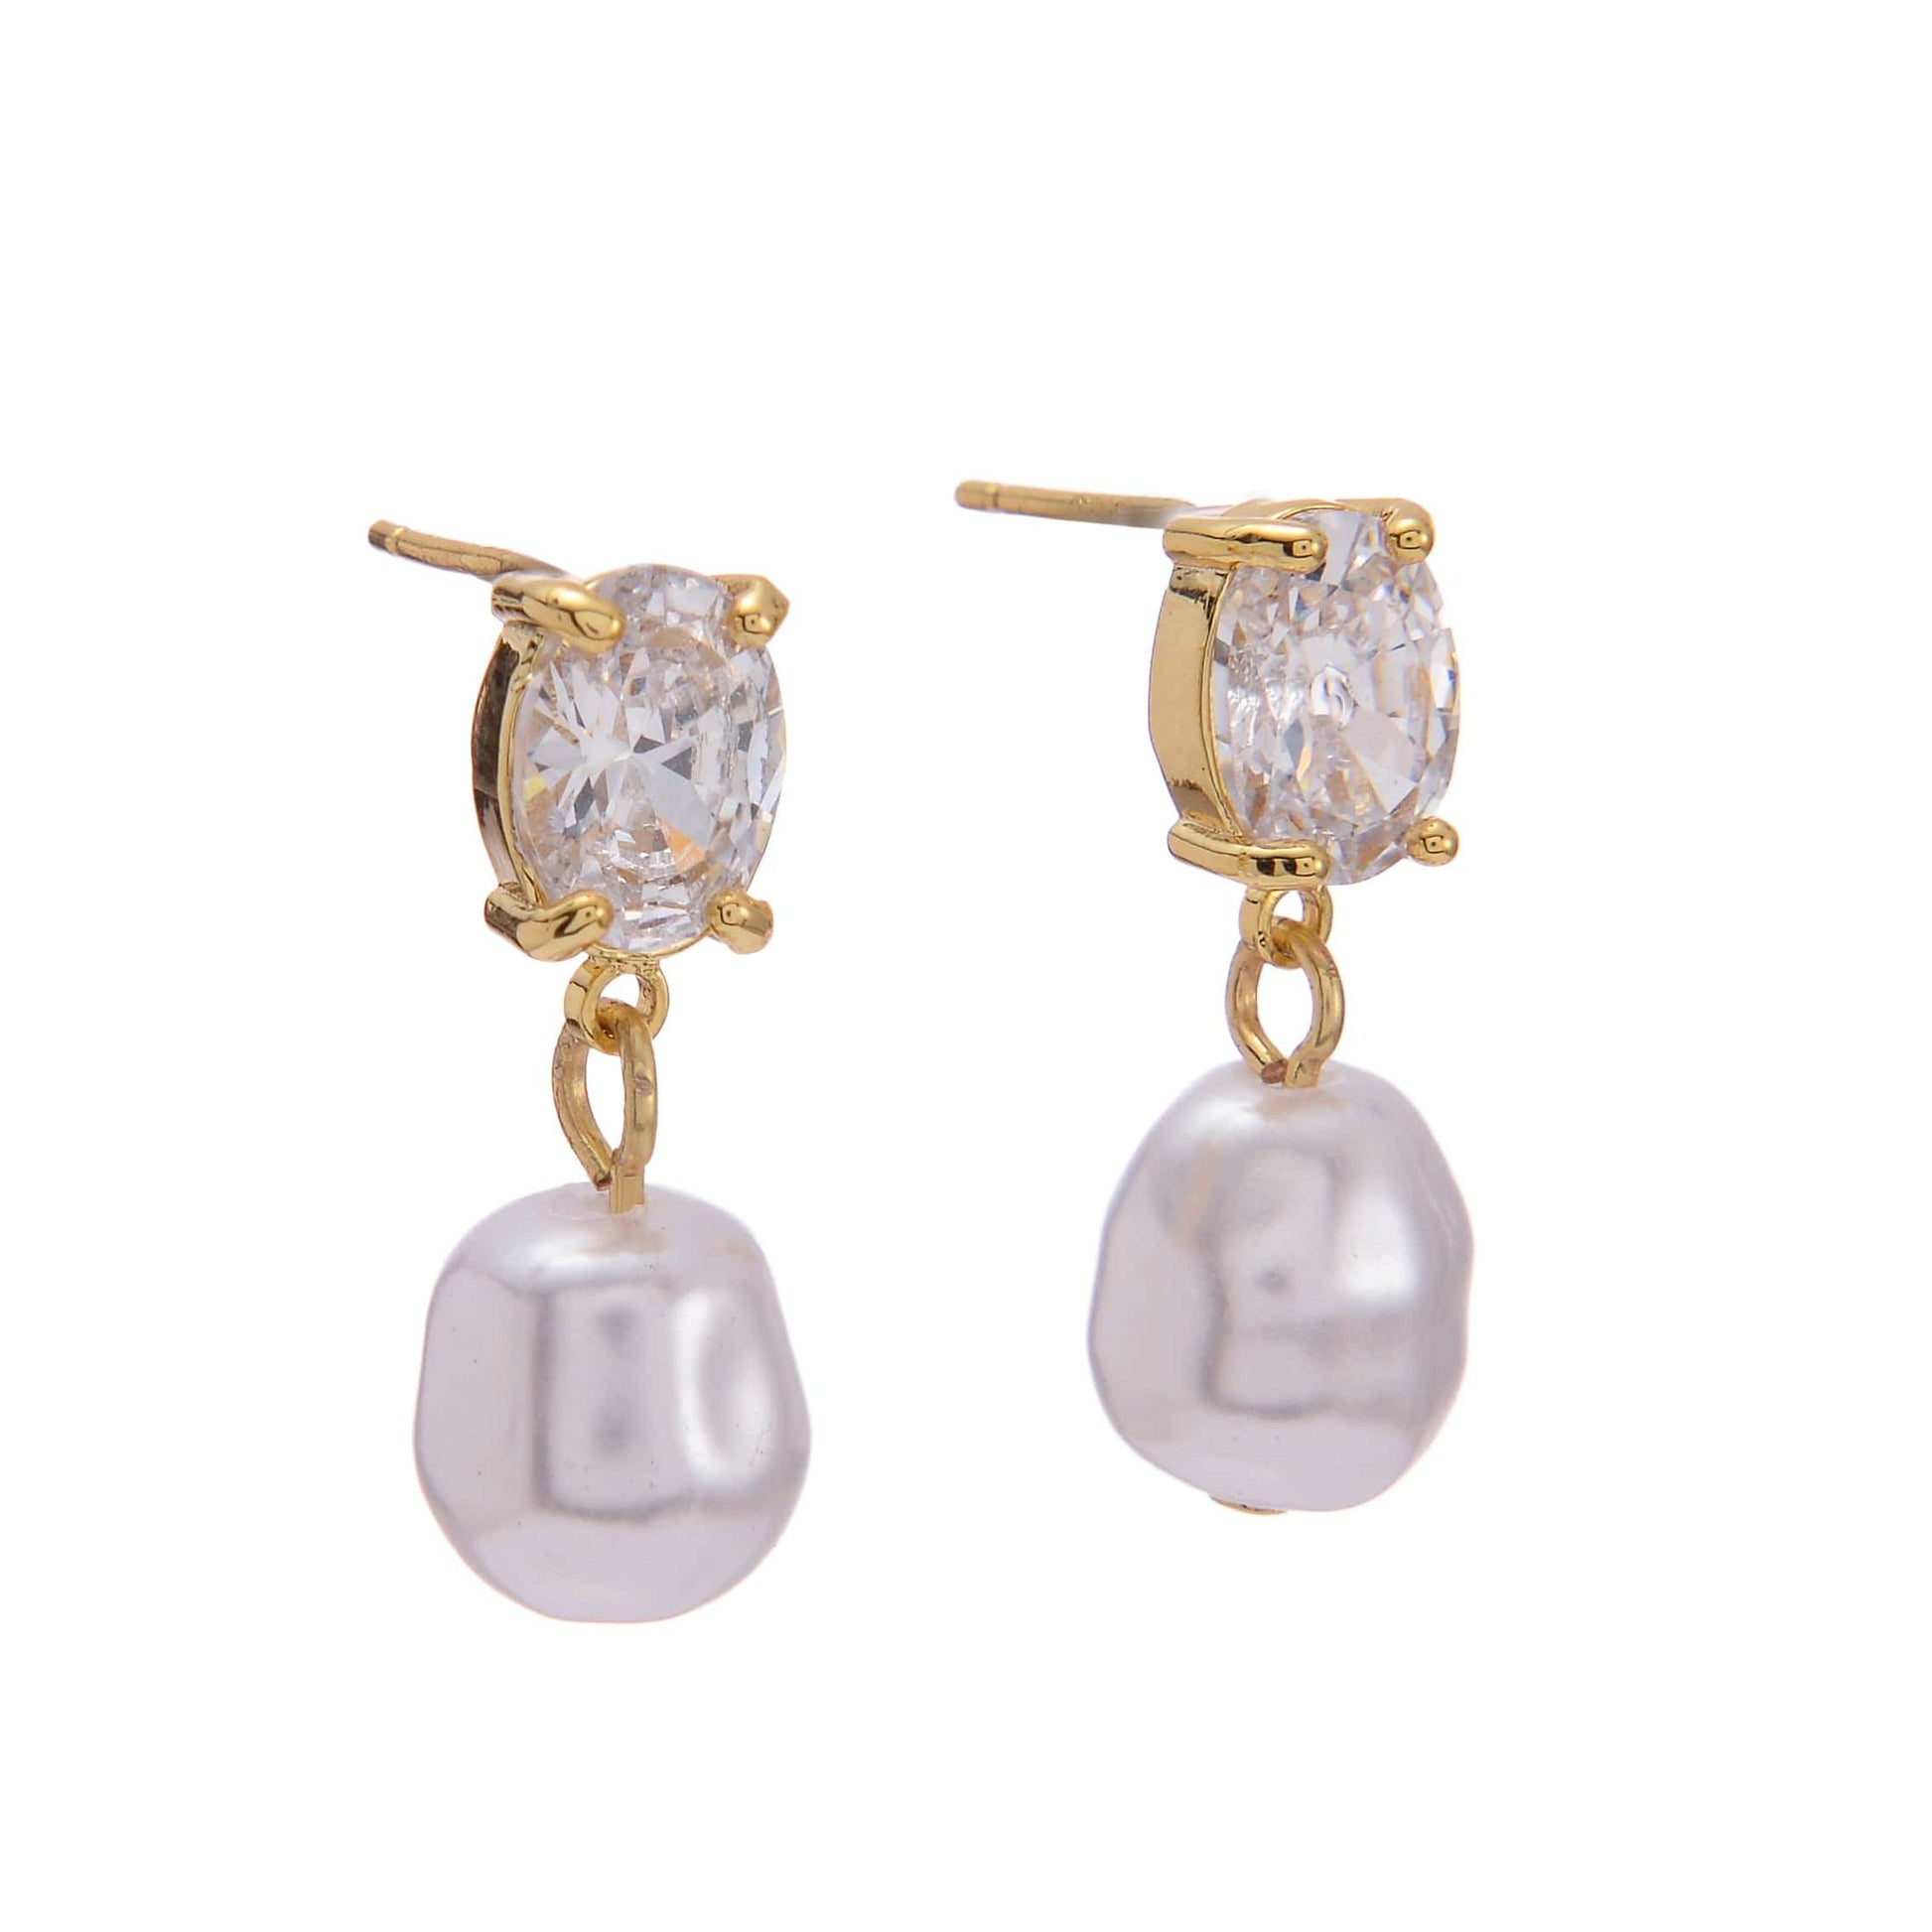 Bridal gold gem stud earring with a pearl snow drop